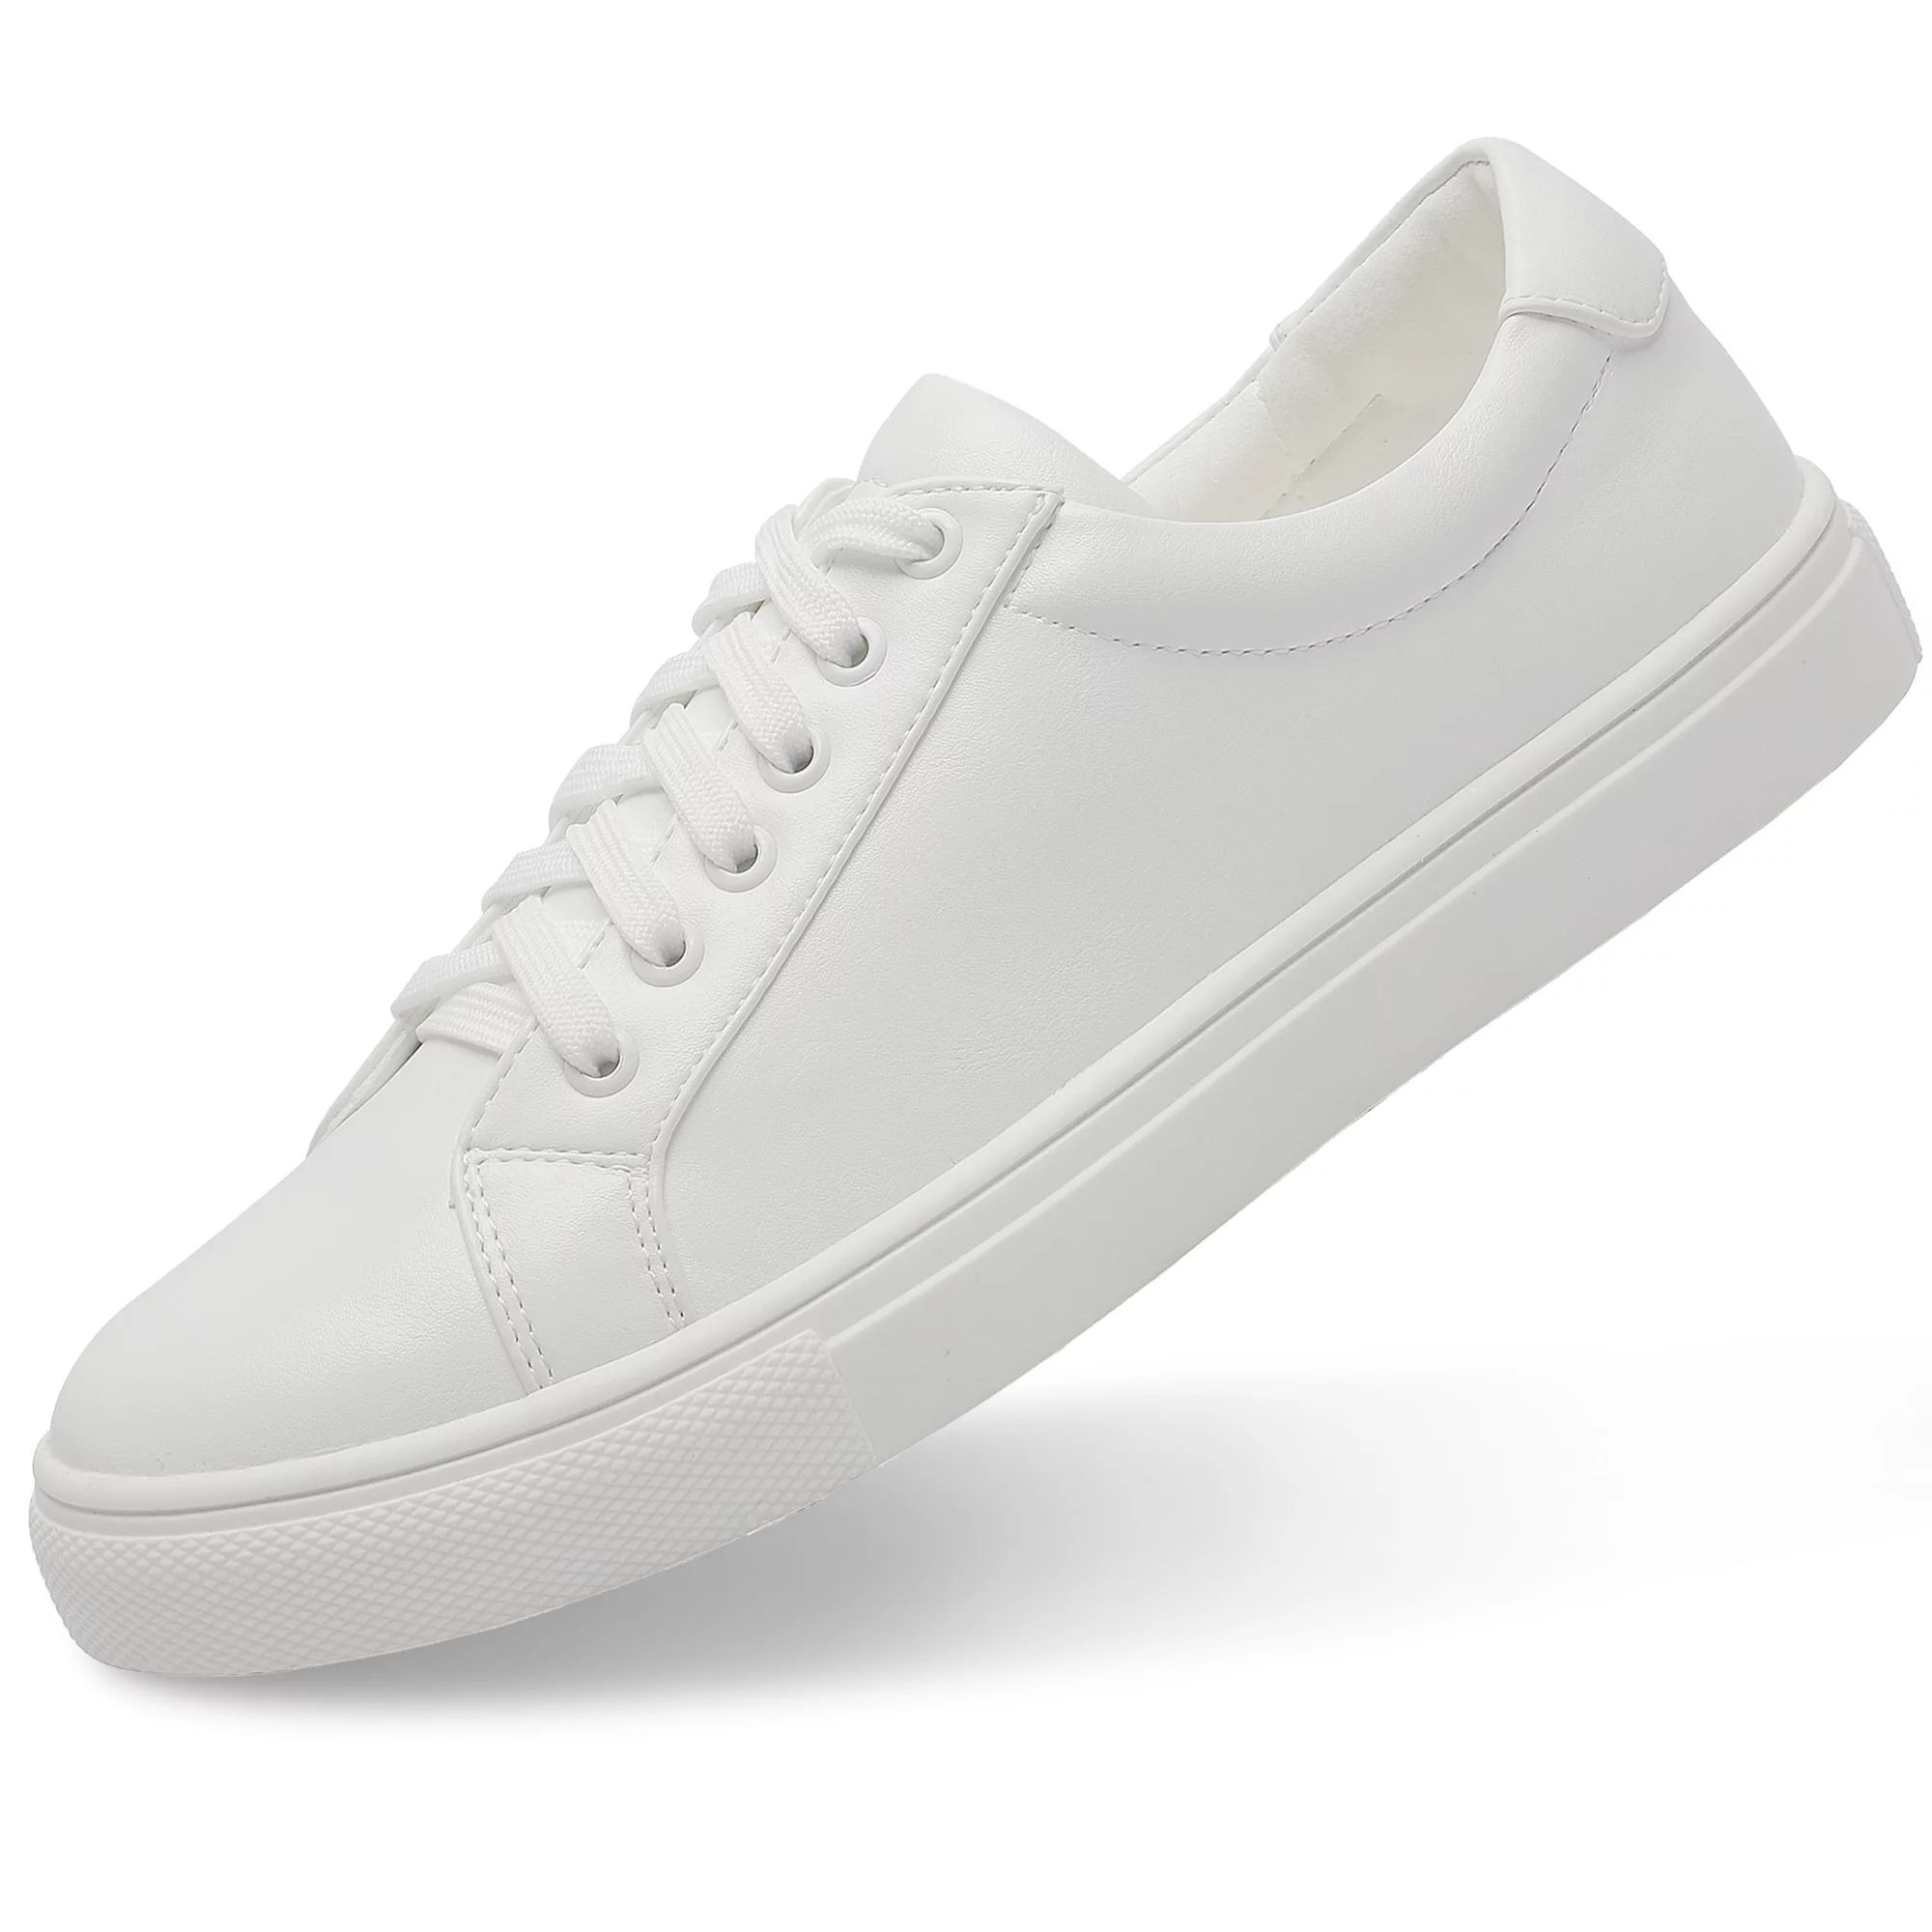 Woman Fashion Pure White Sneakers Casual Lace up Flat Shoes Low Top for Female 8 | Walmart (US)